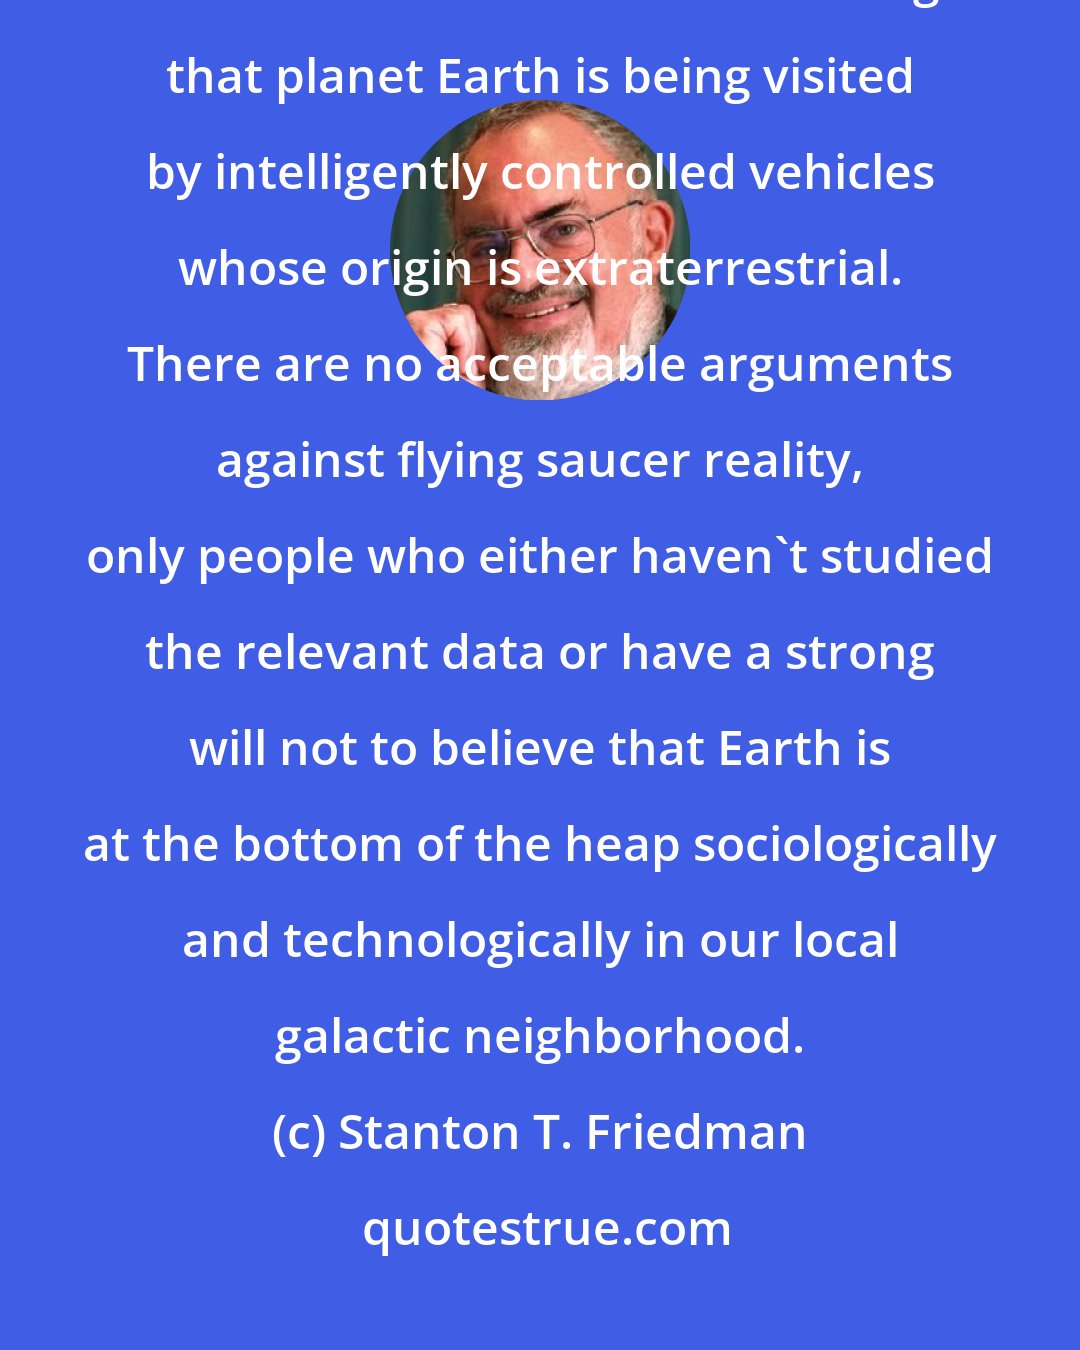 Stanton T. Friedman: There is no doubt in my mind, after 37 years of study and investigation that the evidence is overwhelming that planet Earth is being visited by intelligently controlled vehicles whose origin is extraterrestrial. There are no acceptable arguments against flying saucer reality, only people who either haven't studied the relevant data or have a strong will not to believe that Earth is at the bottom of the heap sociologically and technologically in our local galactic neighborhood.